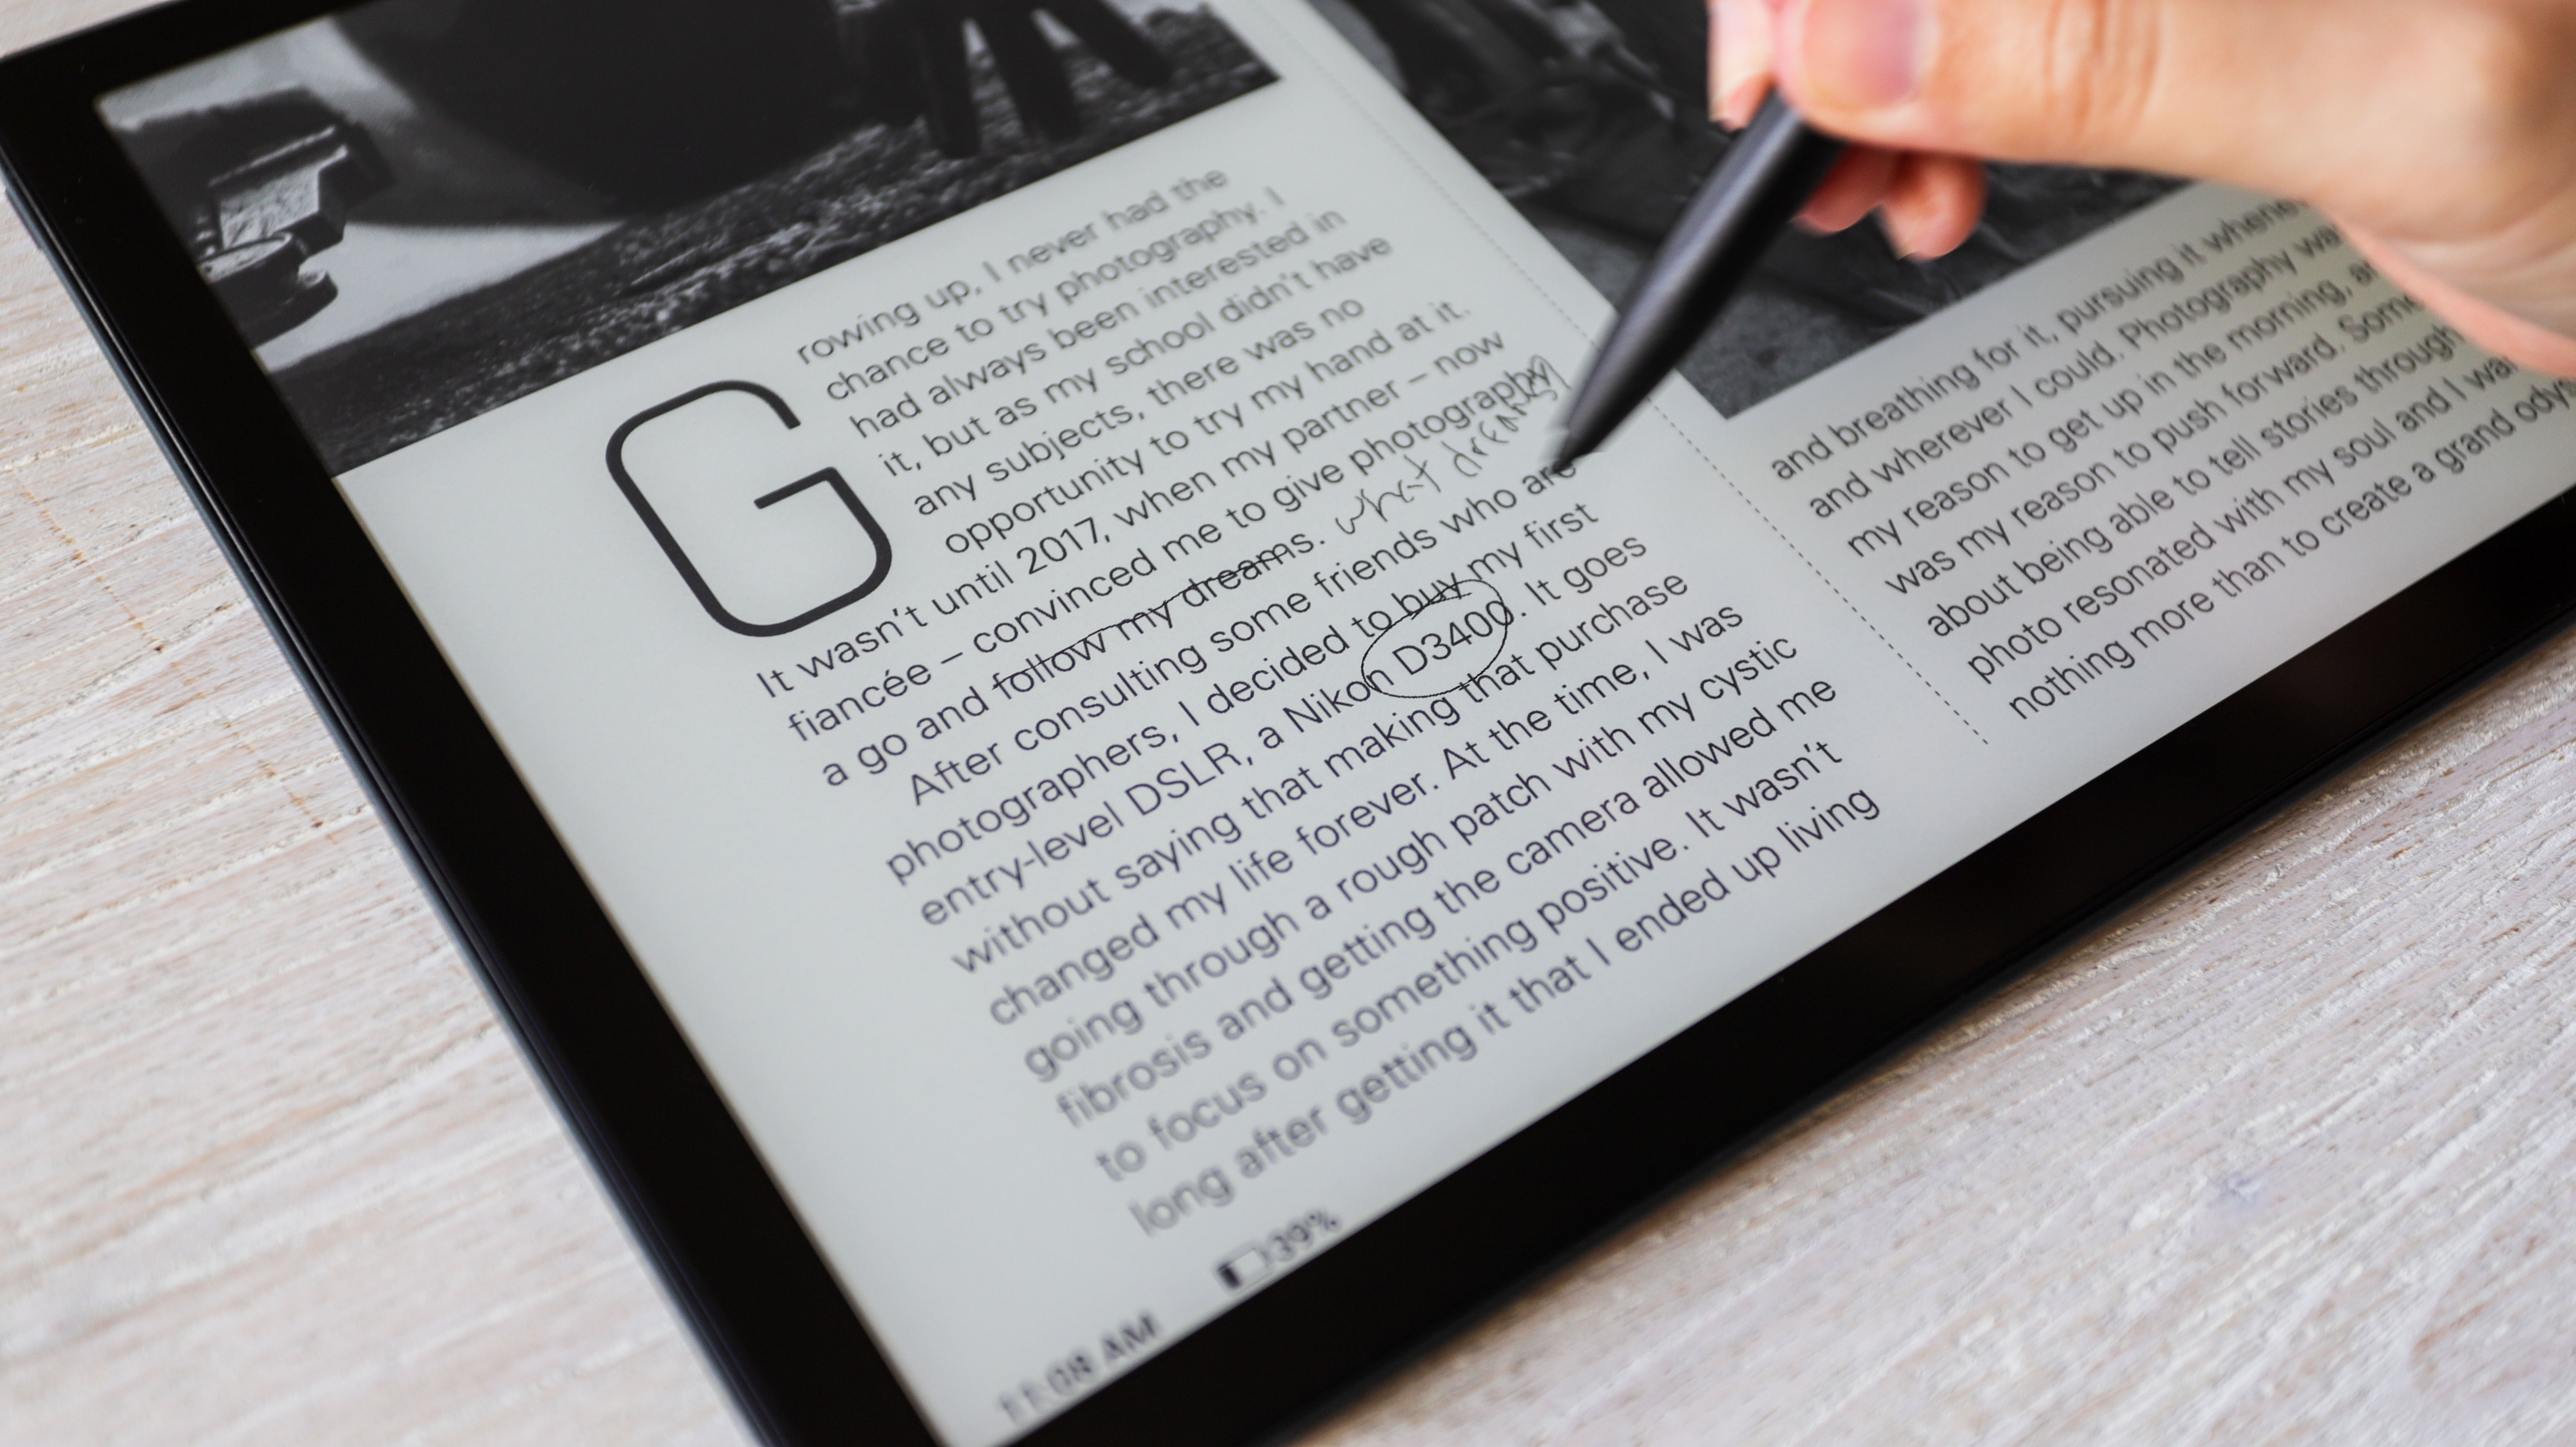 A hand making annotations on a file on the Onyx Boox Tab X with the Pen 2 stylus